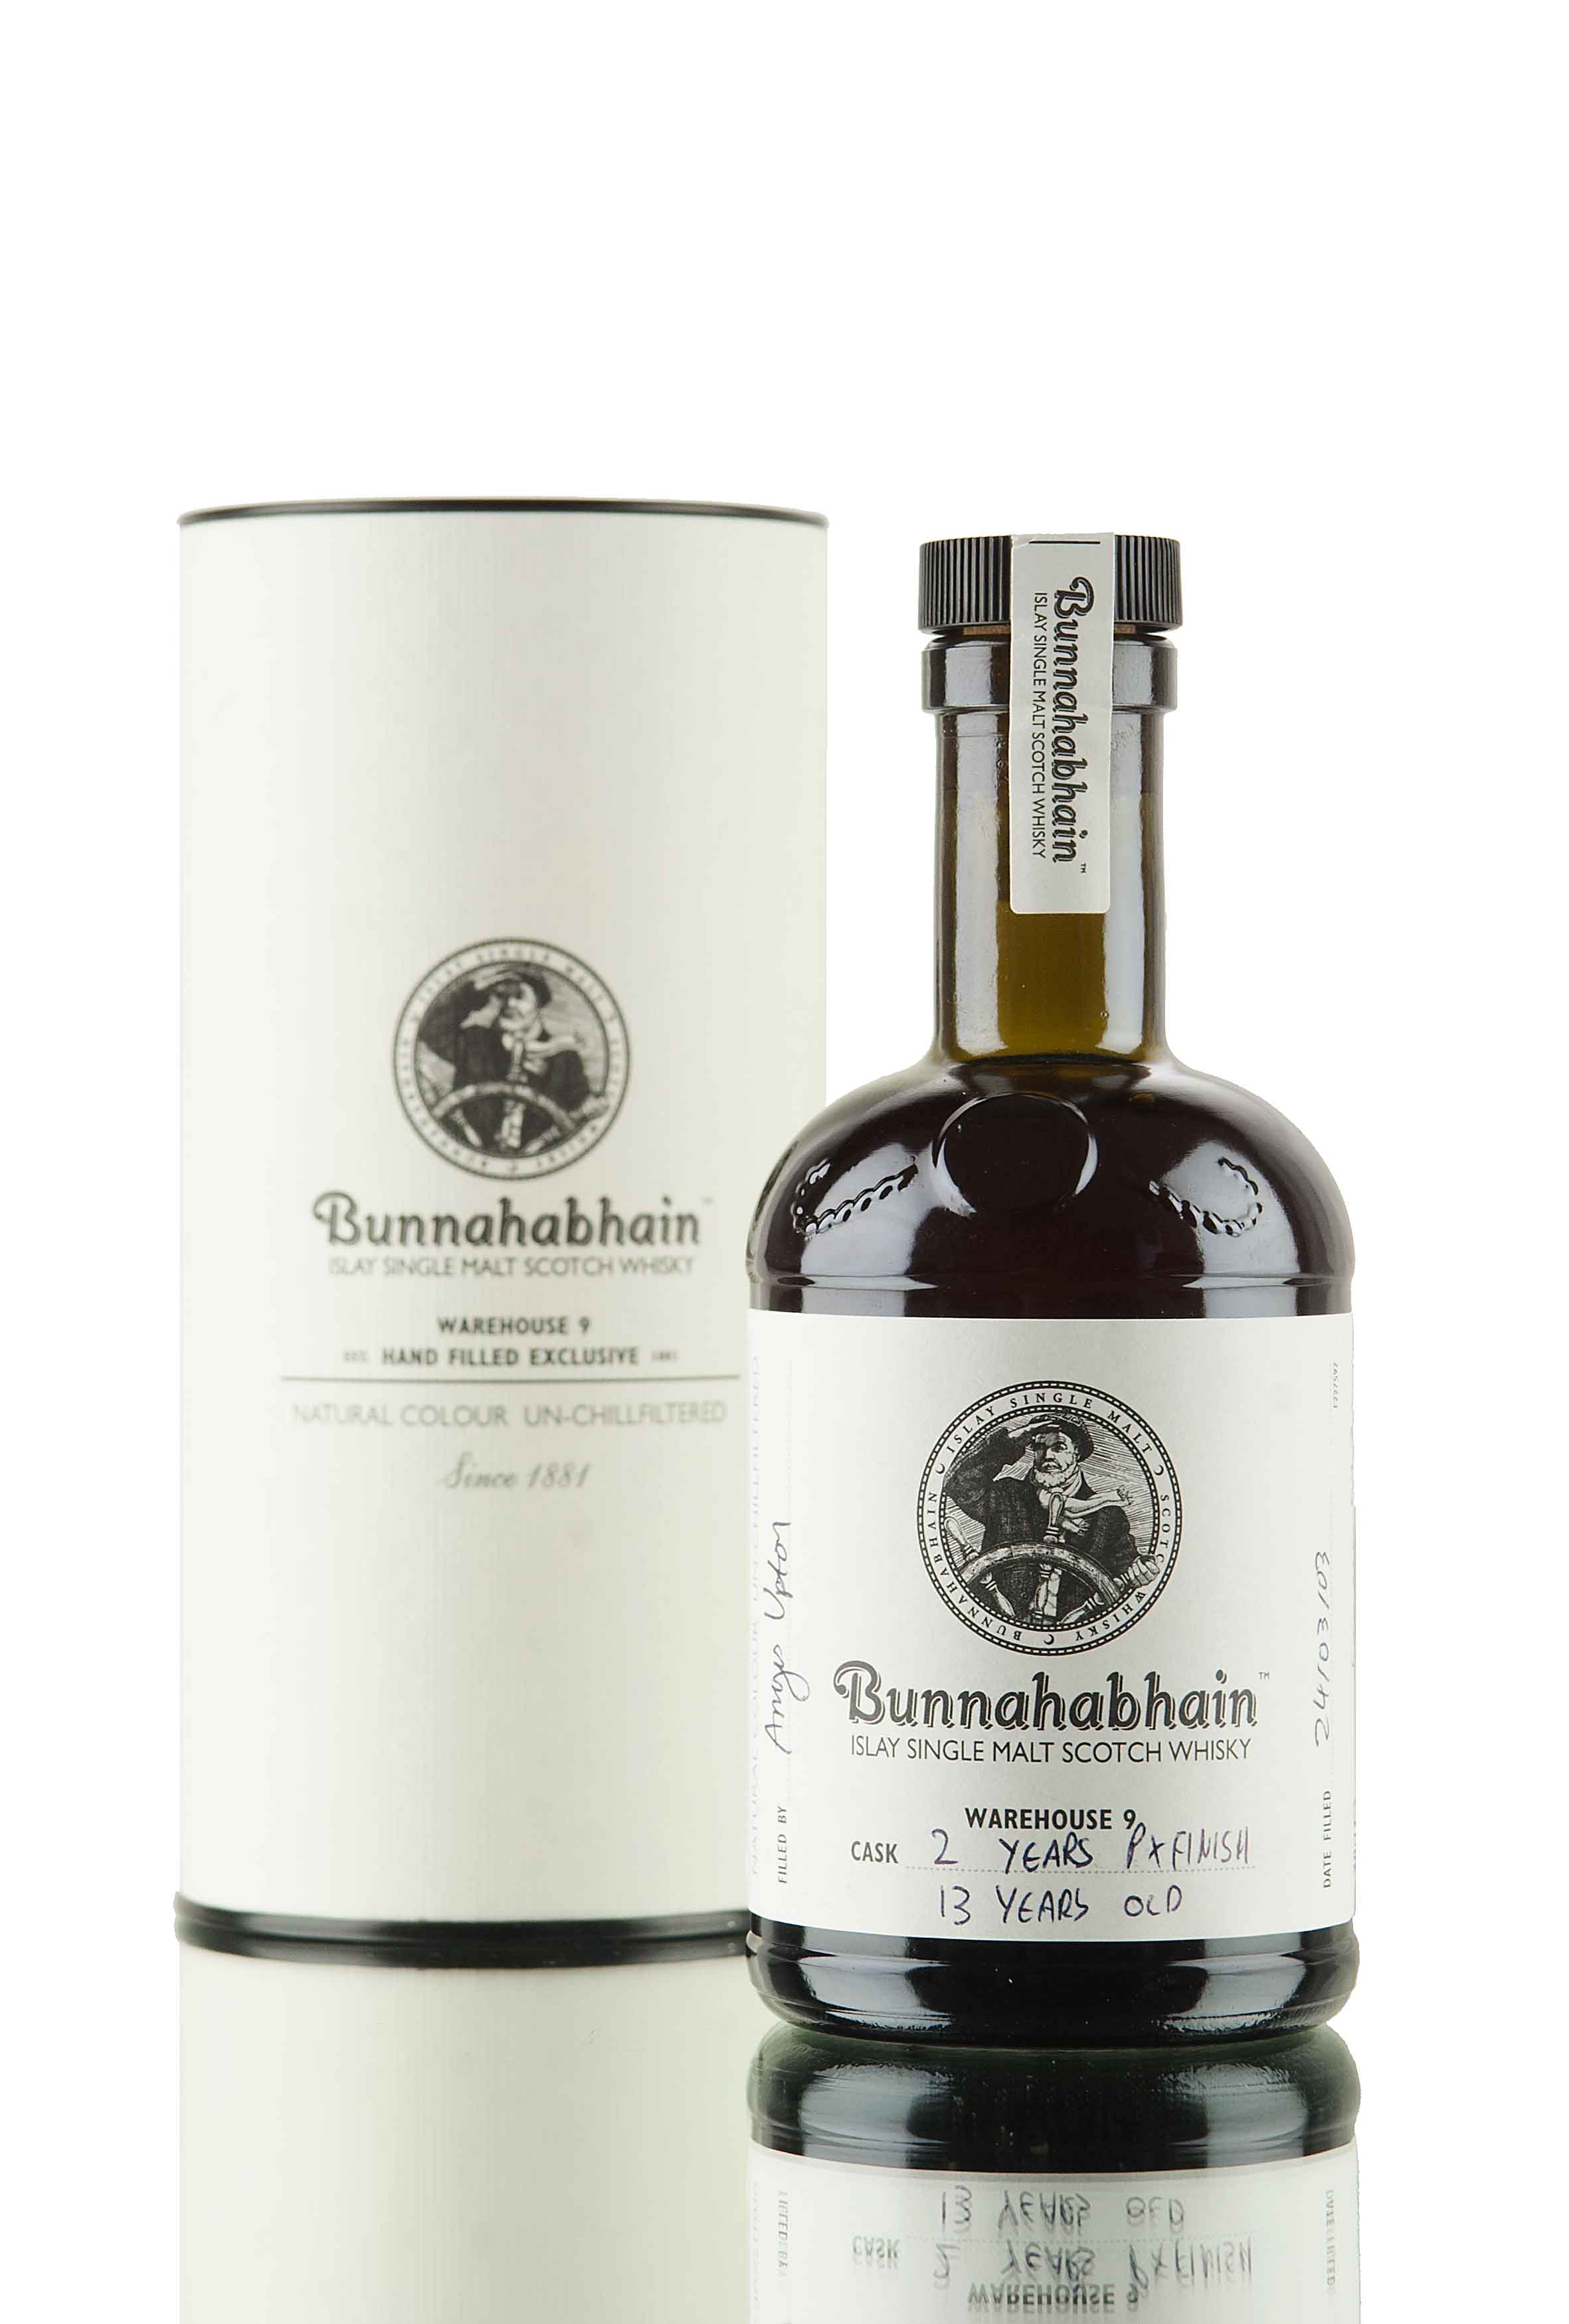 Bunnahabhain 13 Year Old - 2003 / Hand Filled Exclusive